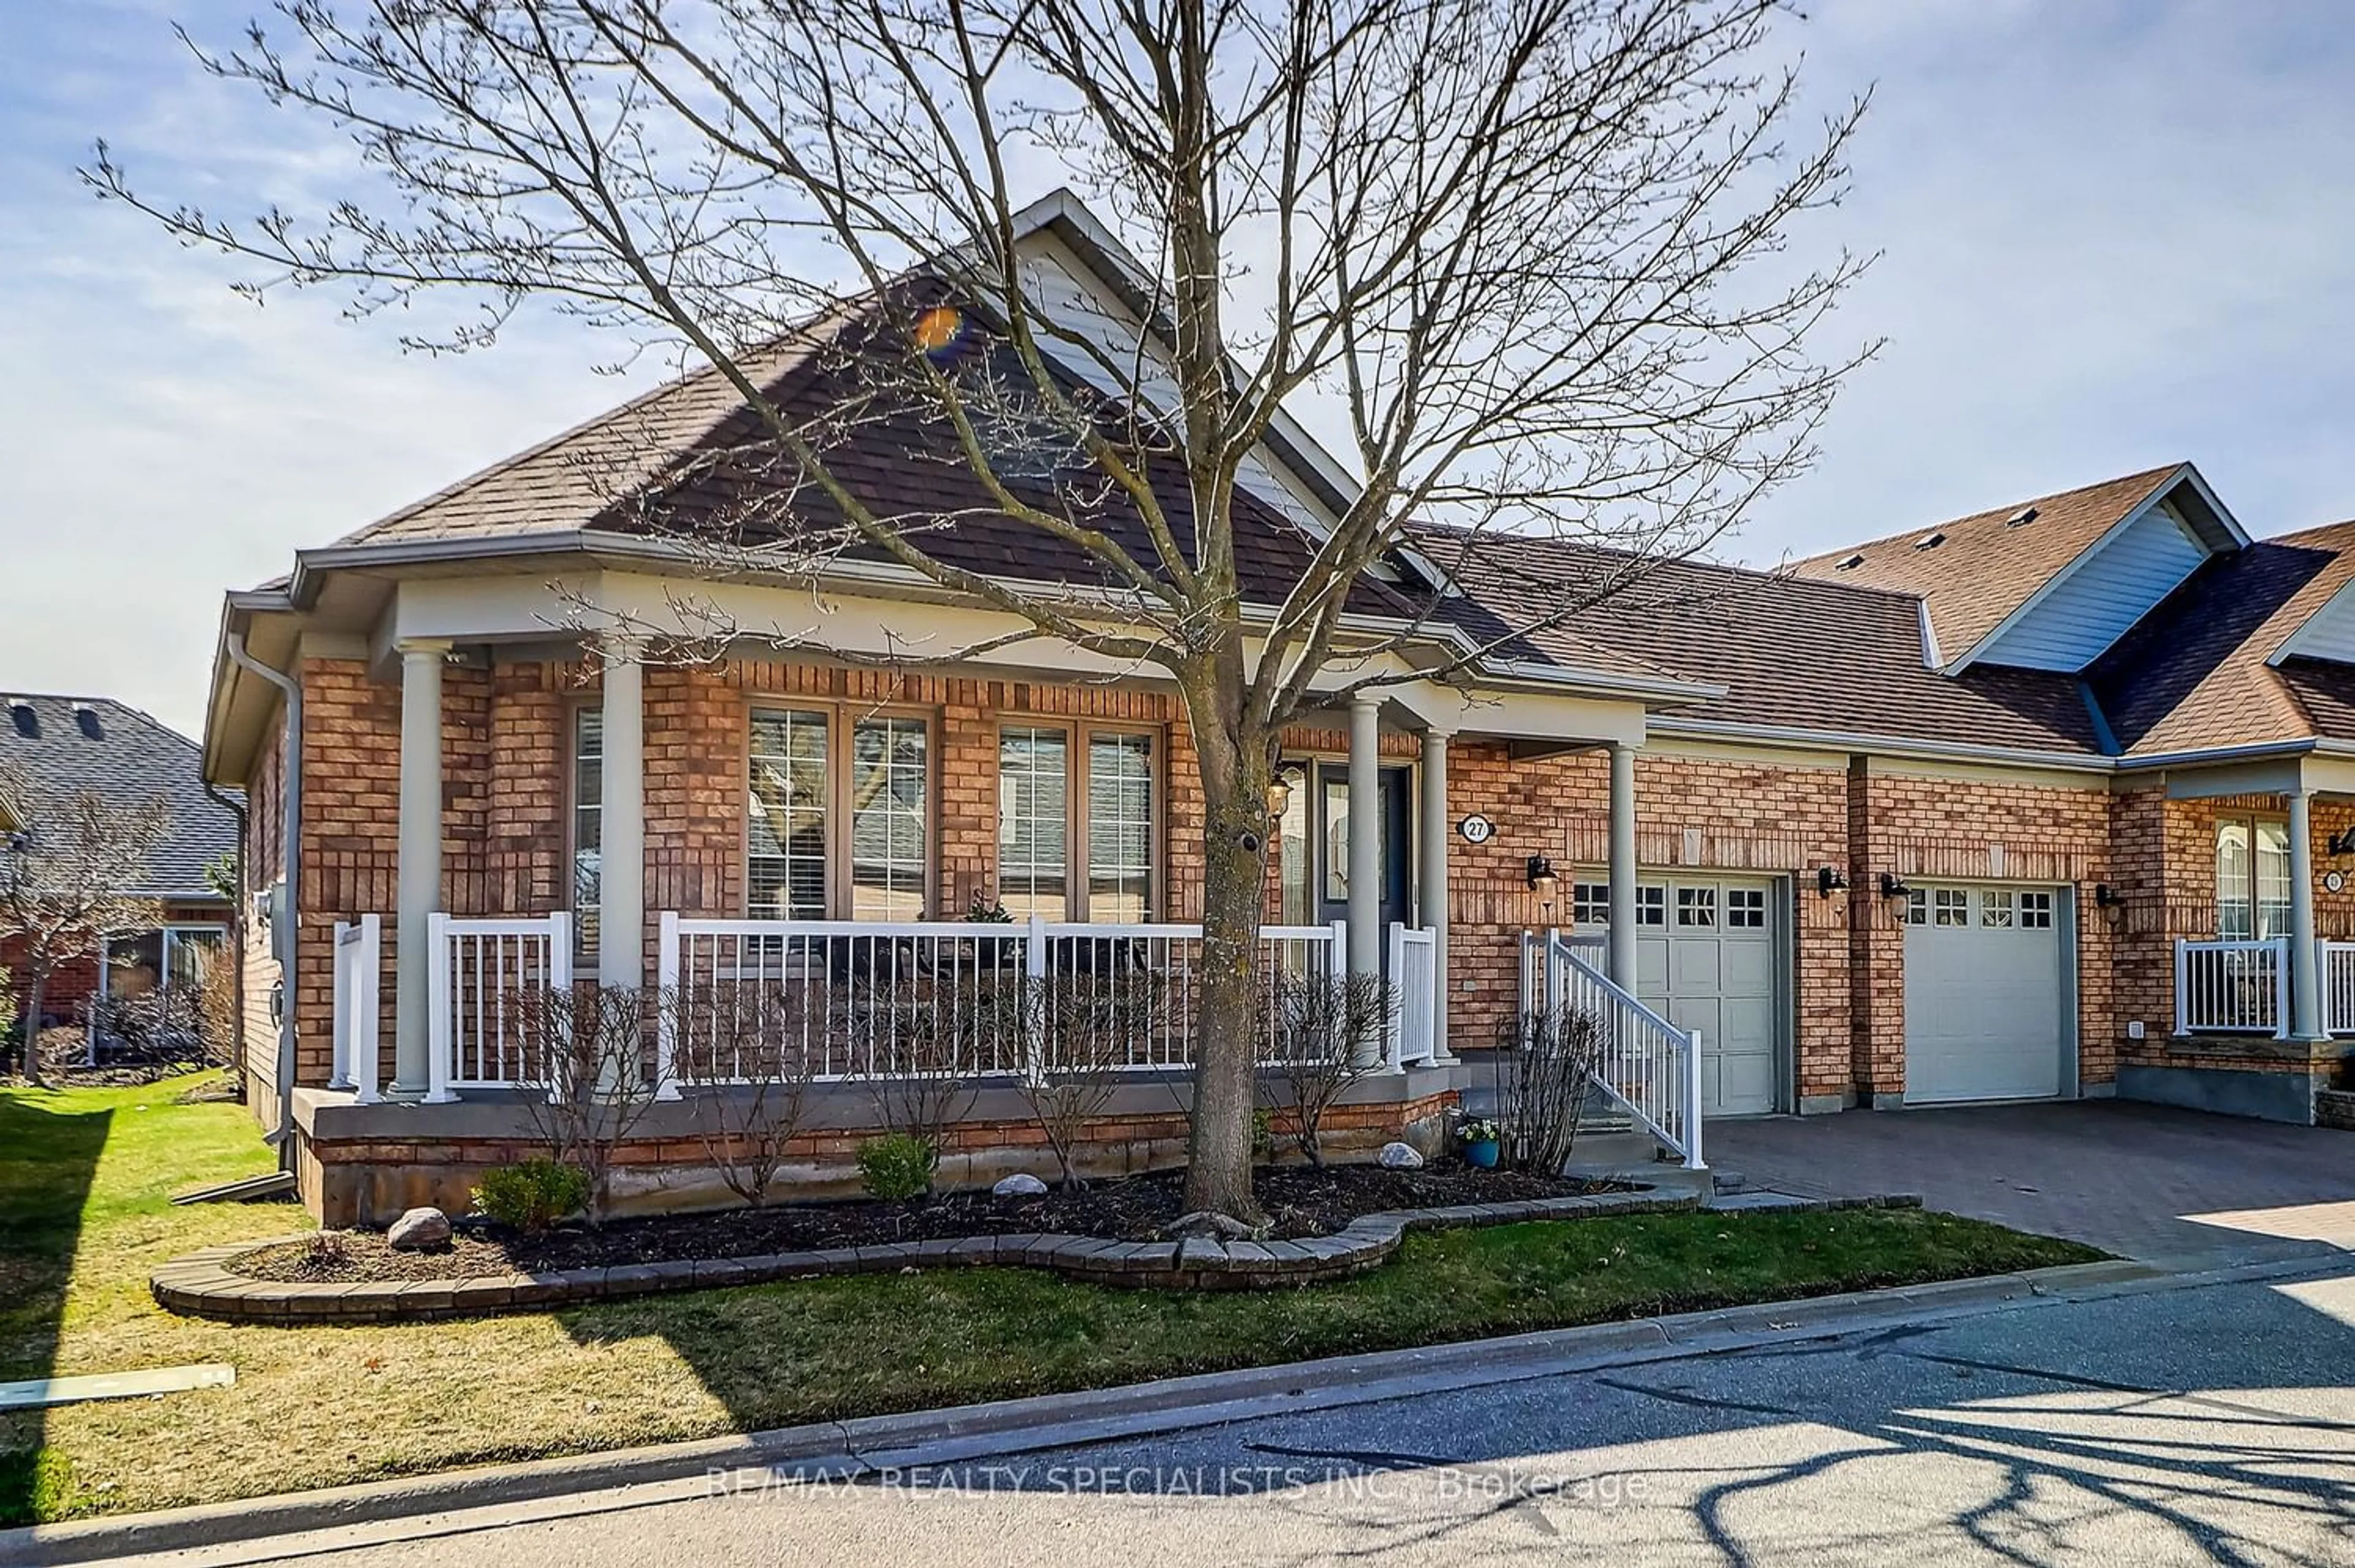 Home with brick exterior material for 27 Amberhill Tr, Brampton Ontario L6R 2R7